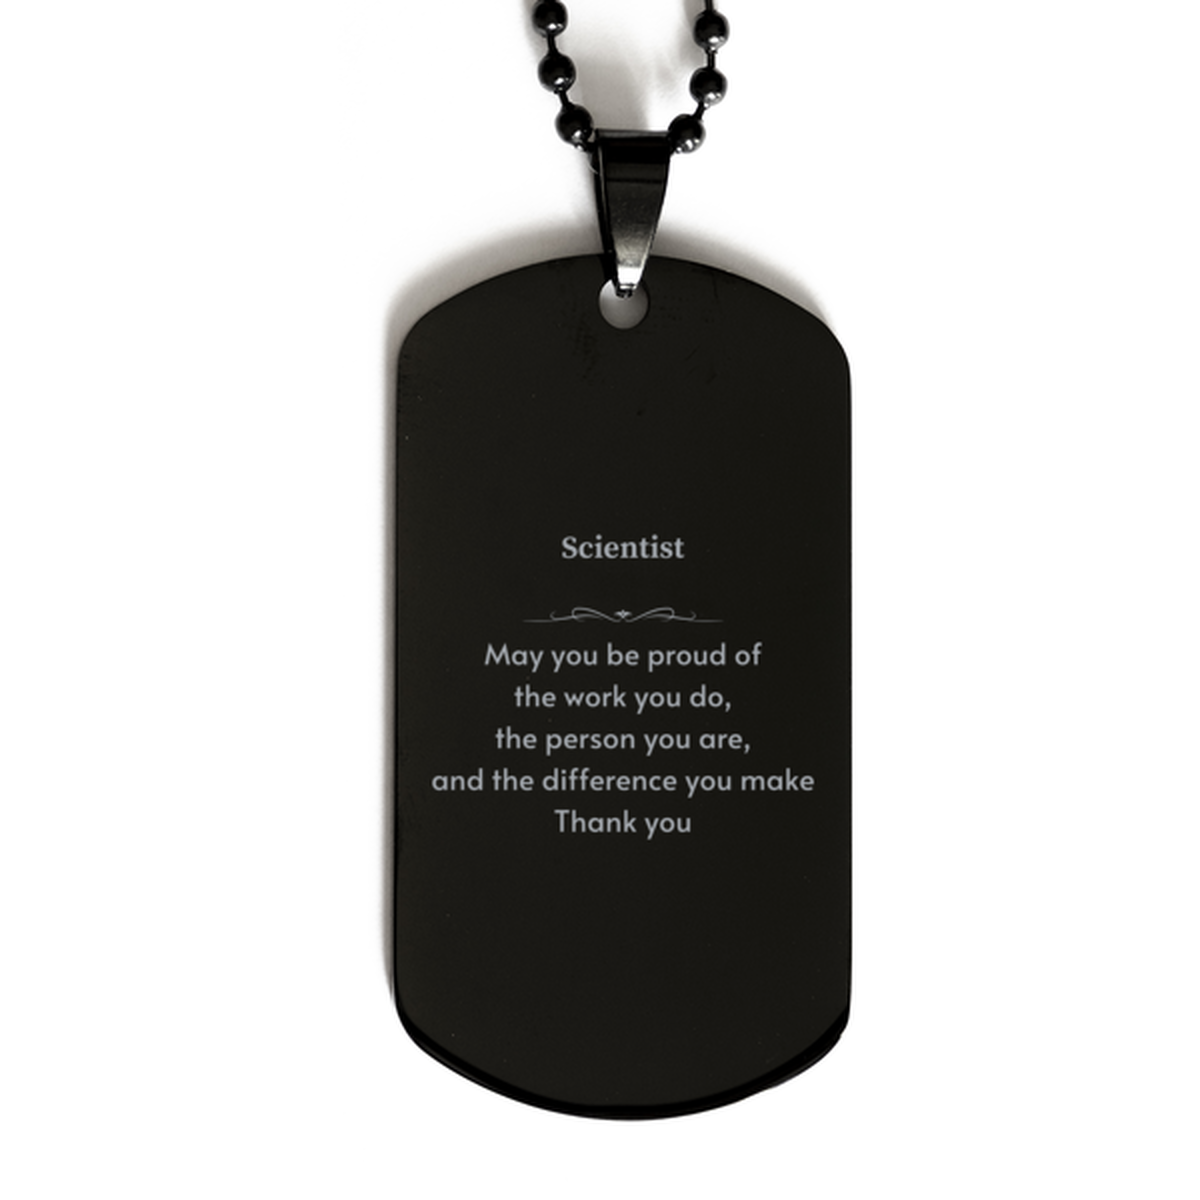 Heartwarming Black Dog Tag Retirement Coworkers Gifts for Scientist, Scientist May You be proud of the work you do, the person you are Gifts for Boss Men Women Friends